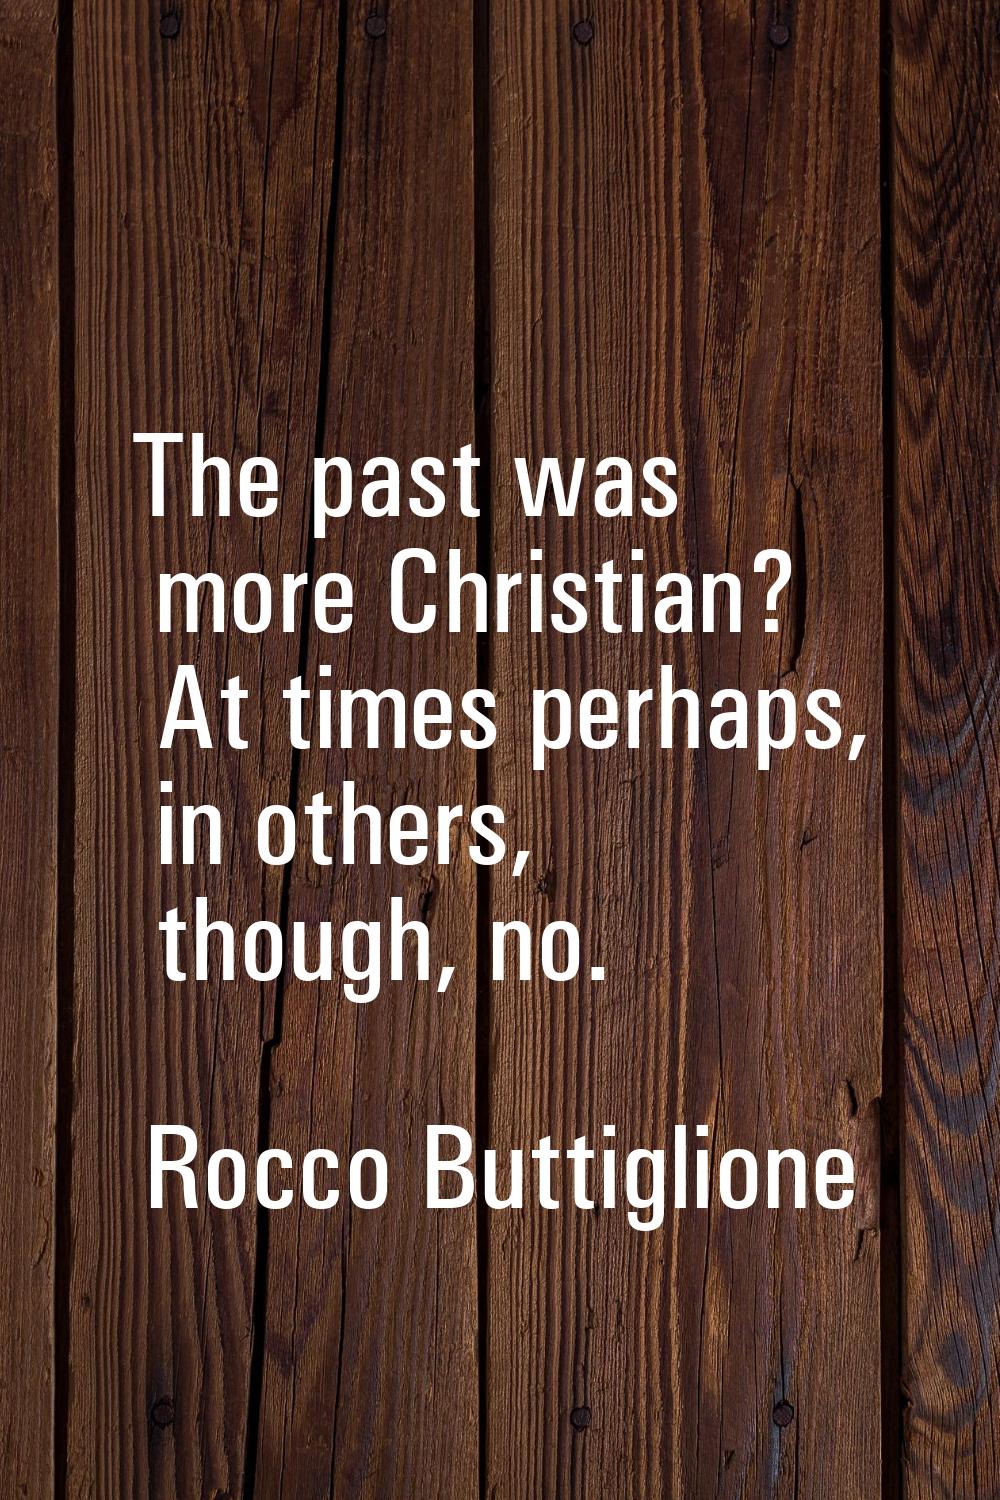 The past was more Christian? At times perhaps, in others, though, no.